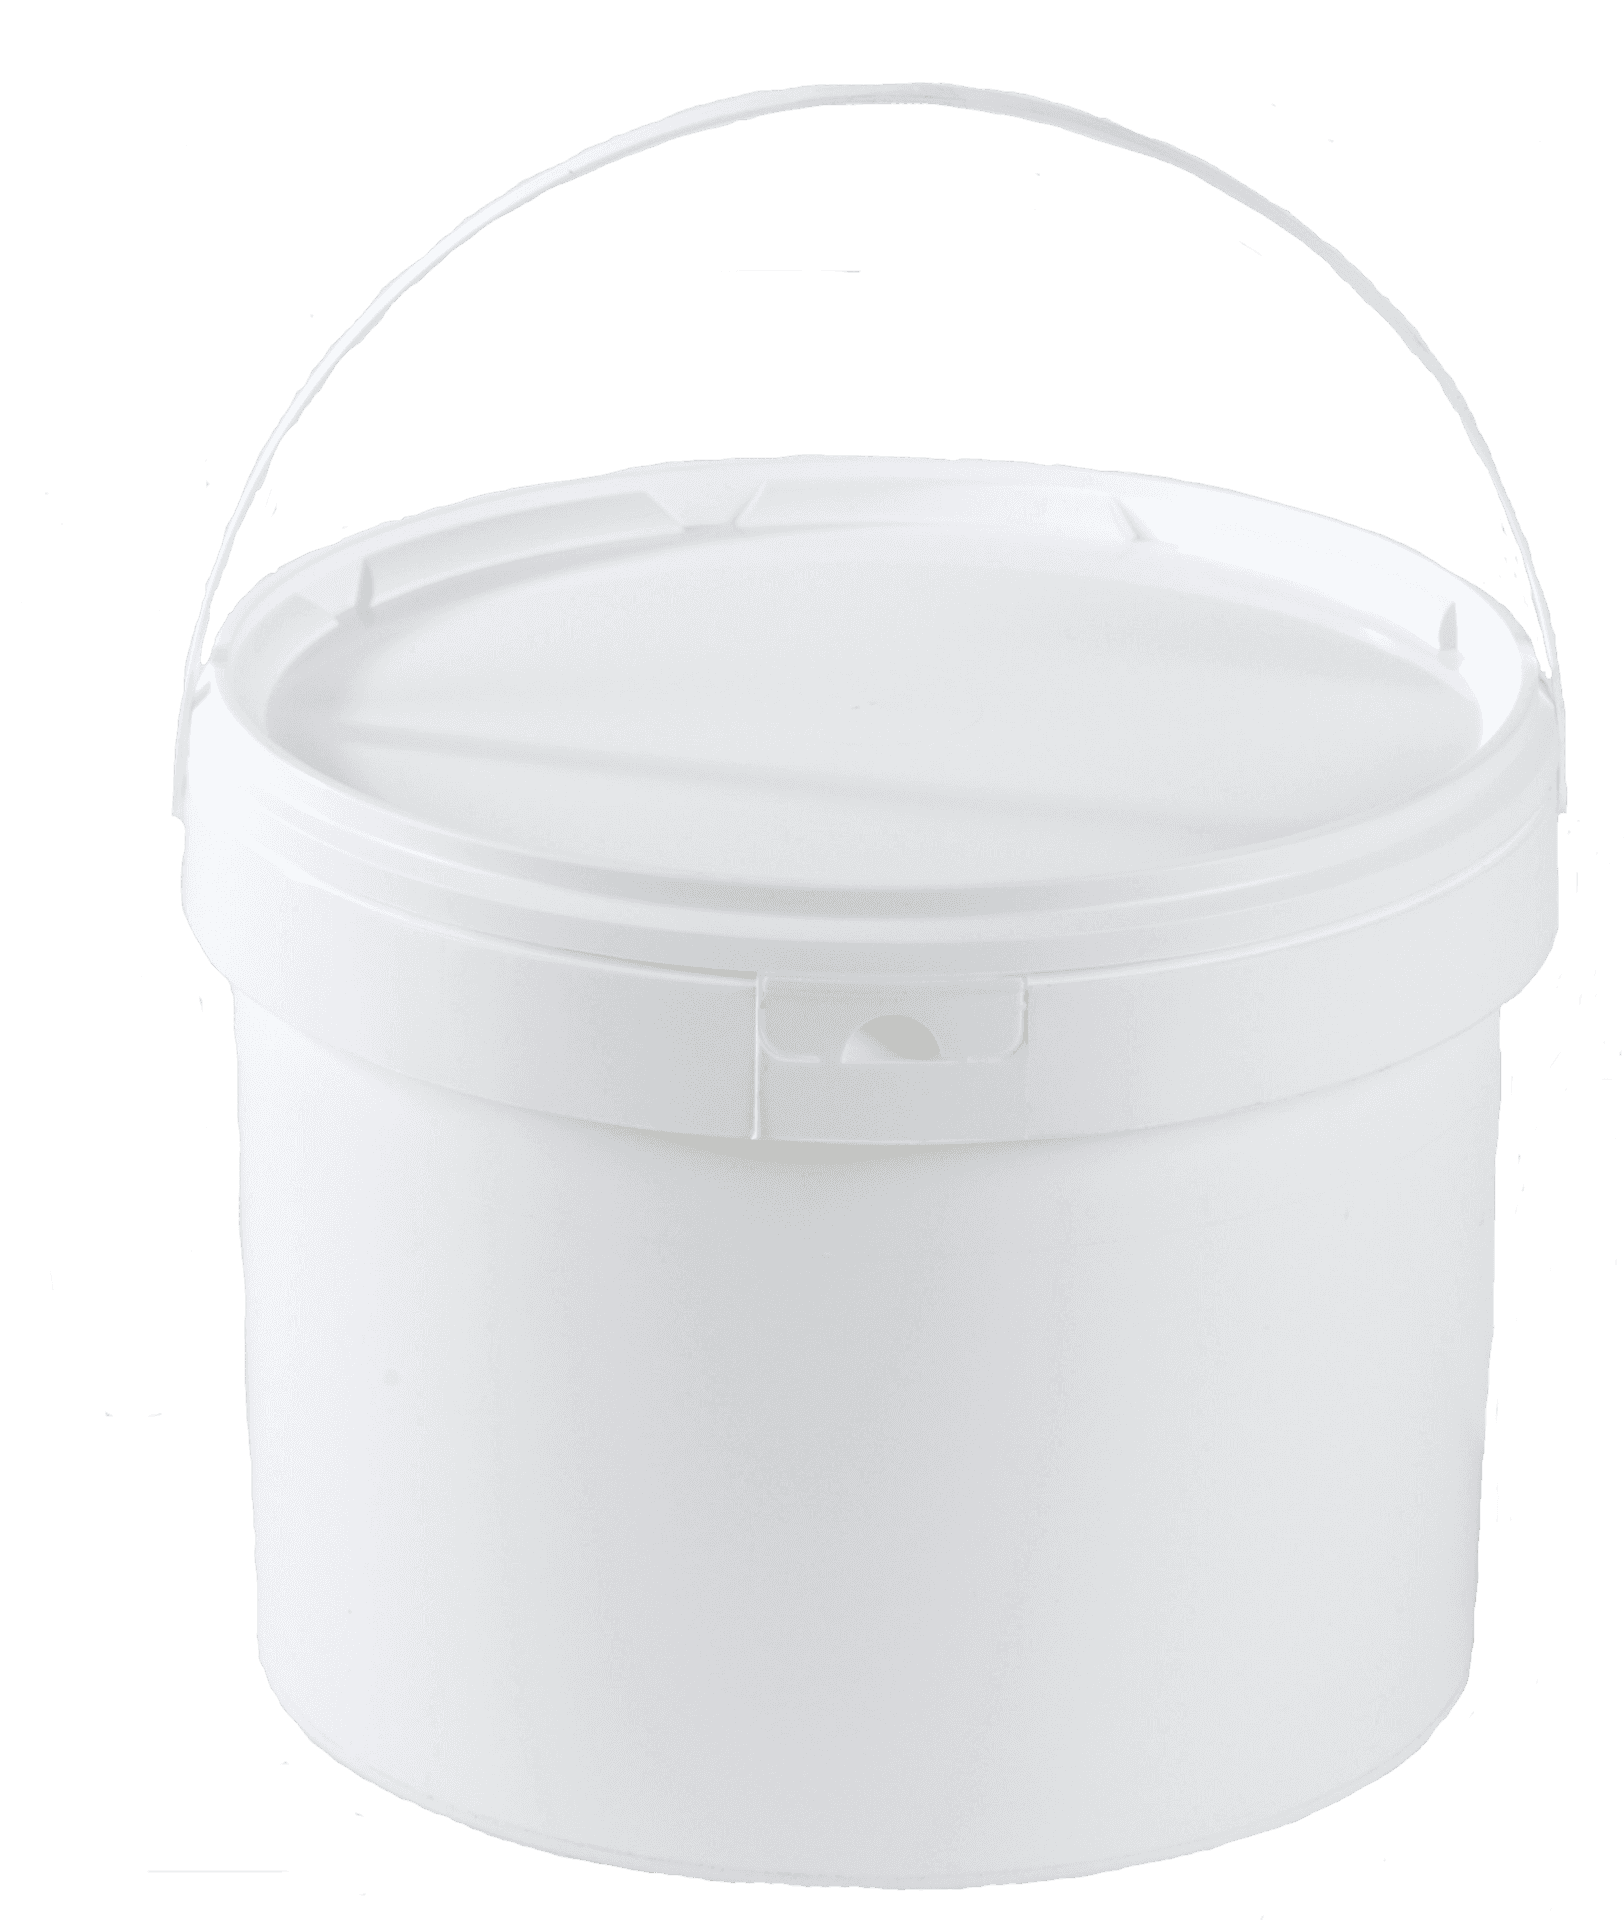 White Plastic Bucketwith Lid PNG